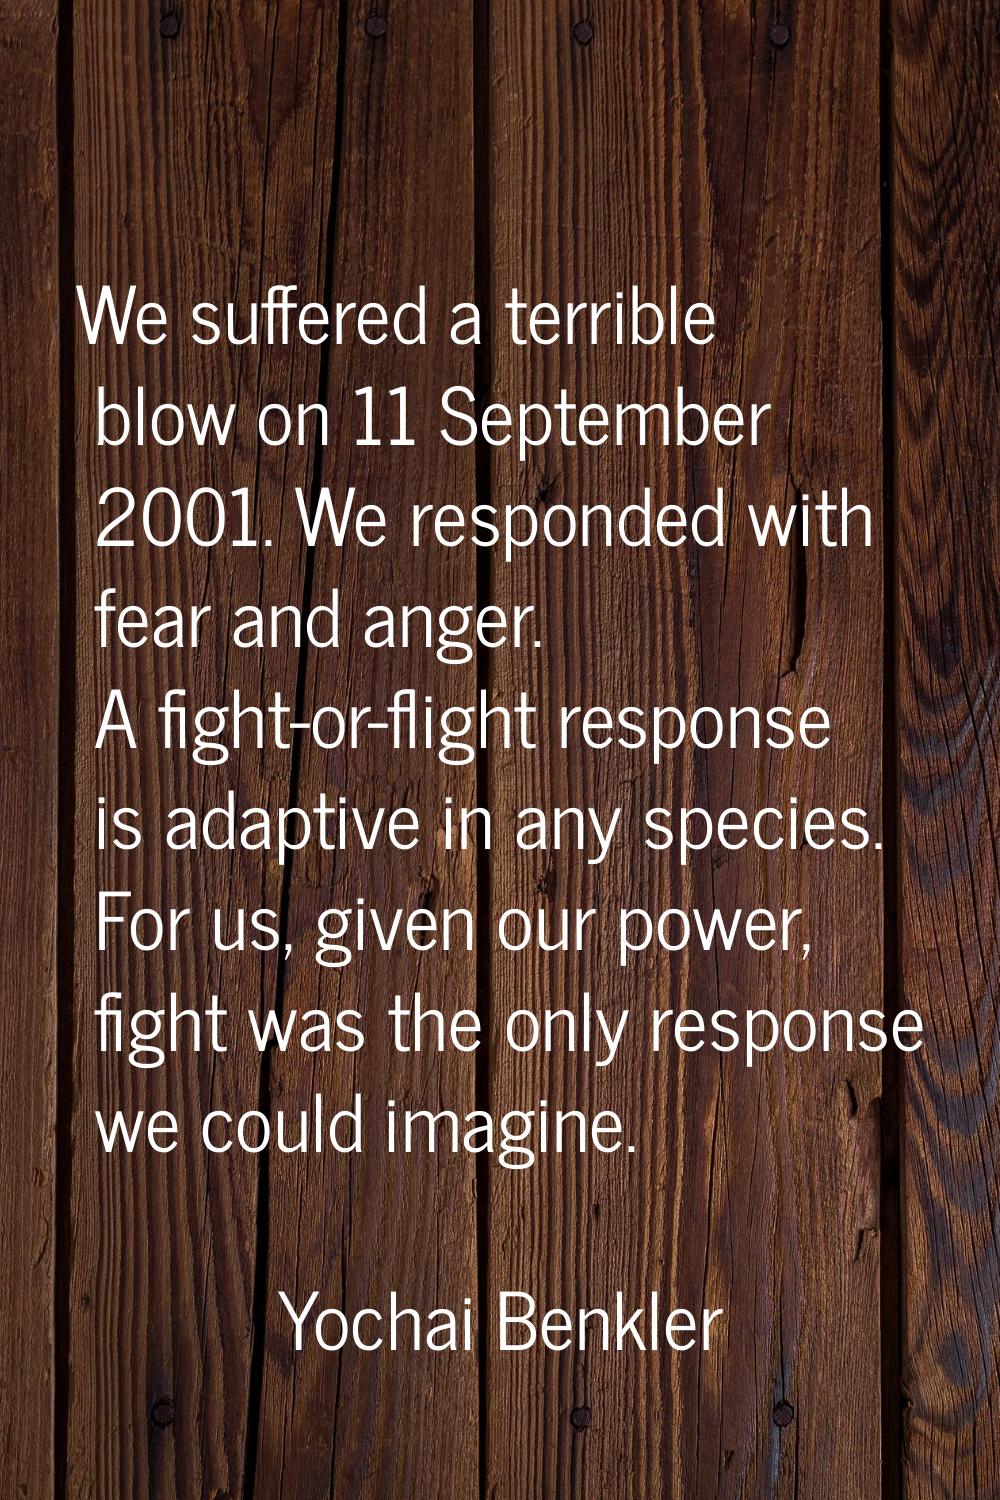 We suffered a terrible blow on 11 September 2001. We responded with fear and anger. A fight-or-flig